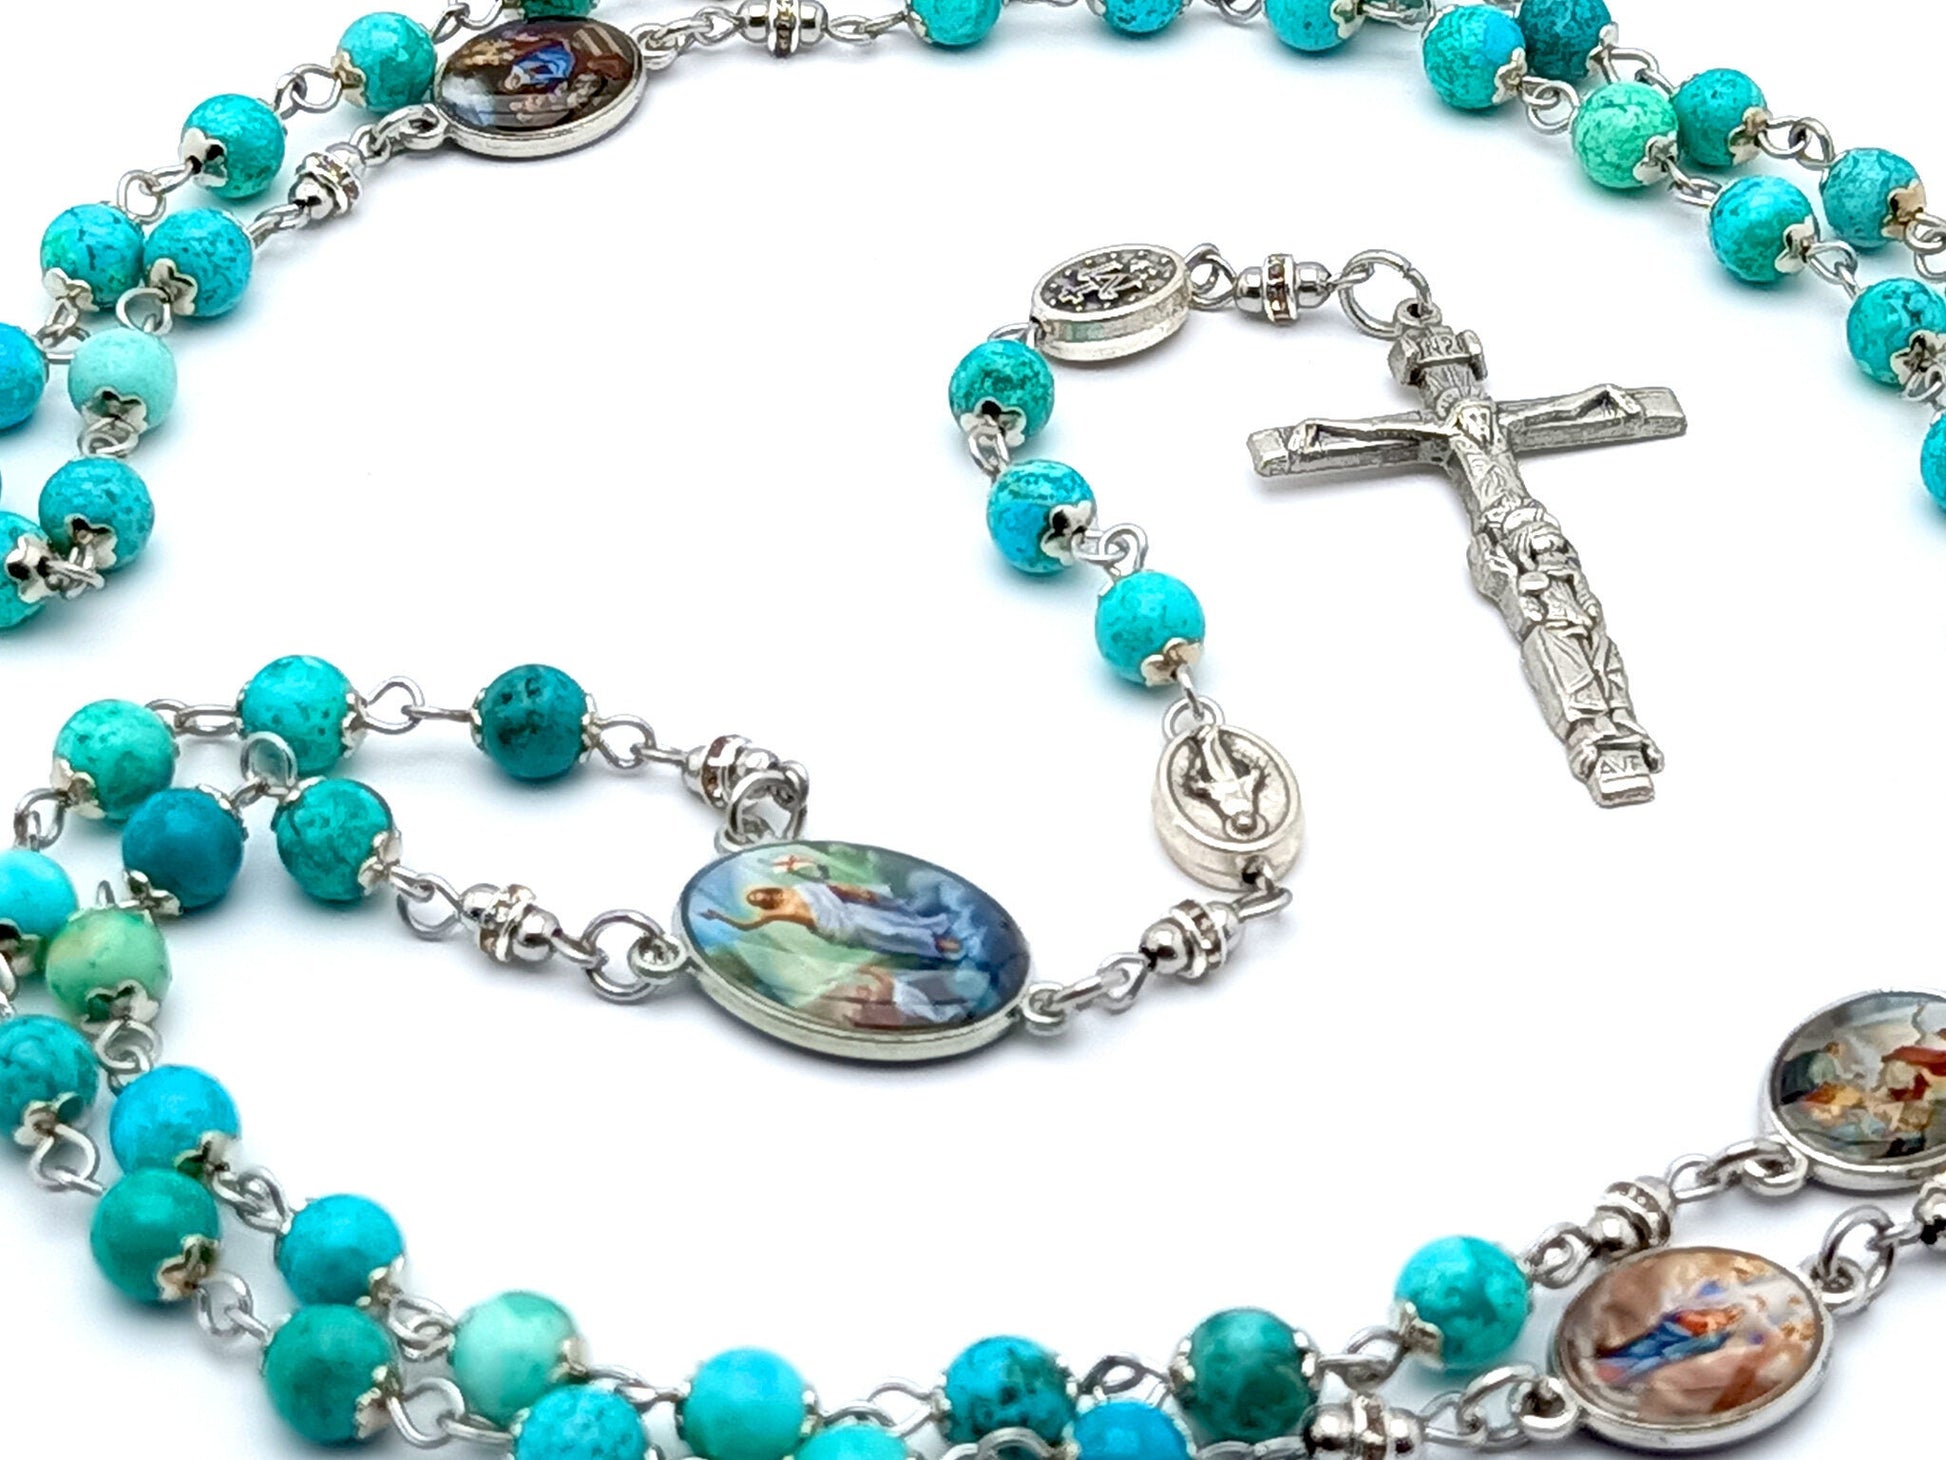 Joyful Mysteries unique rosary beads with turquoise gemstone beads and picture linking beads, silver crucifix and picture centre medal.